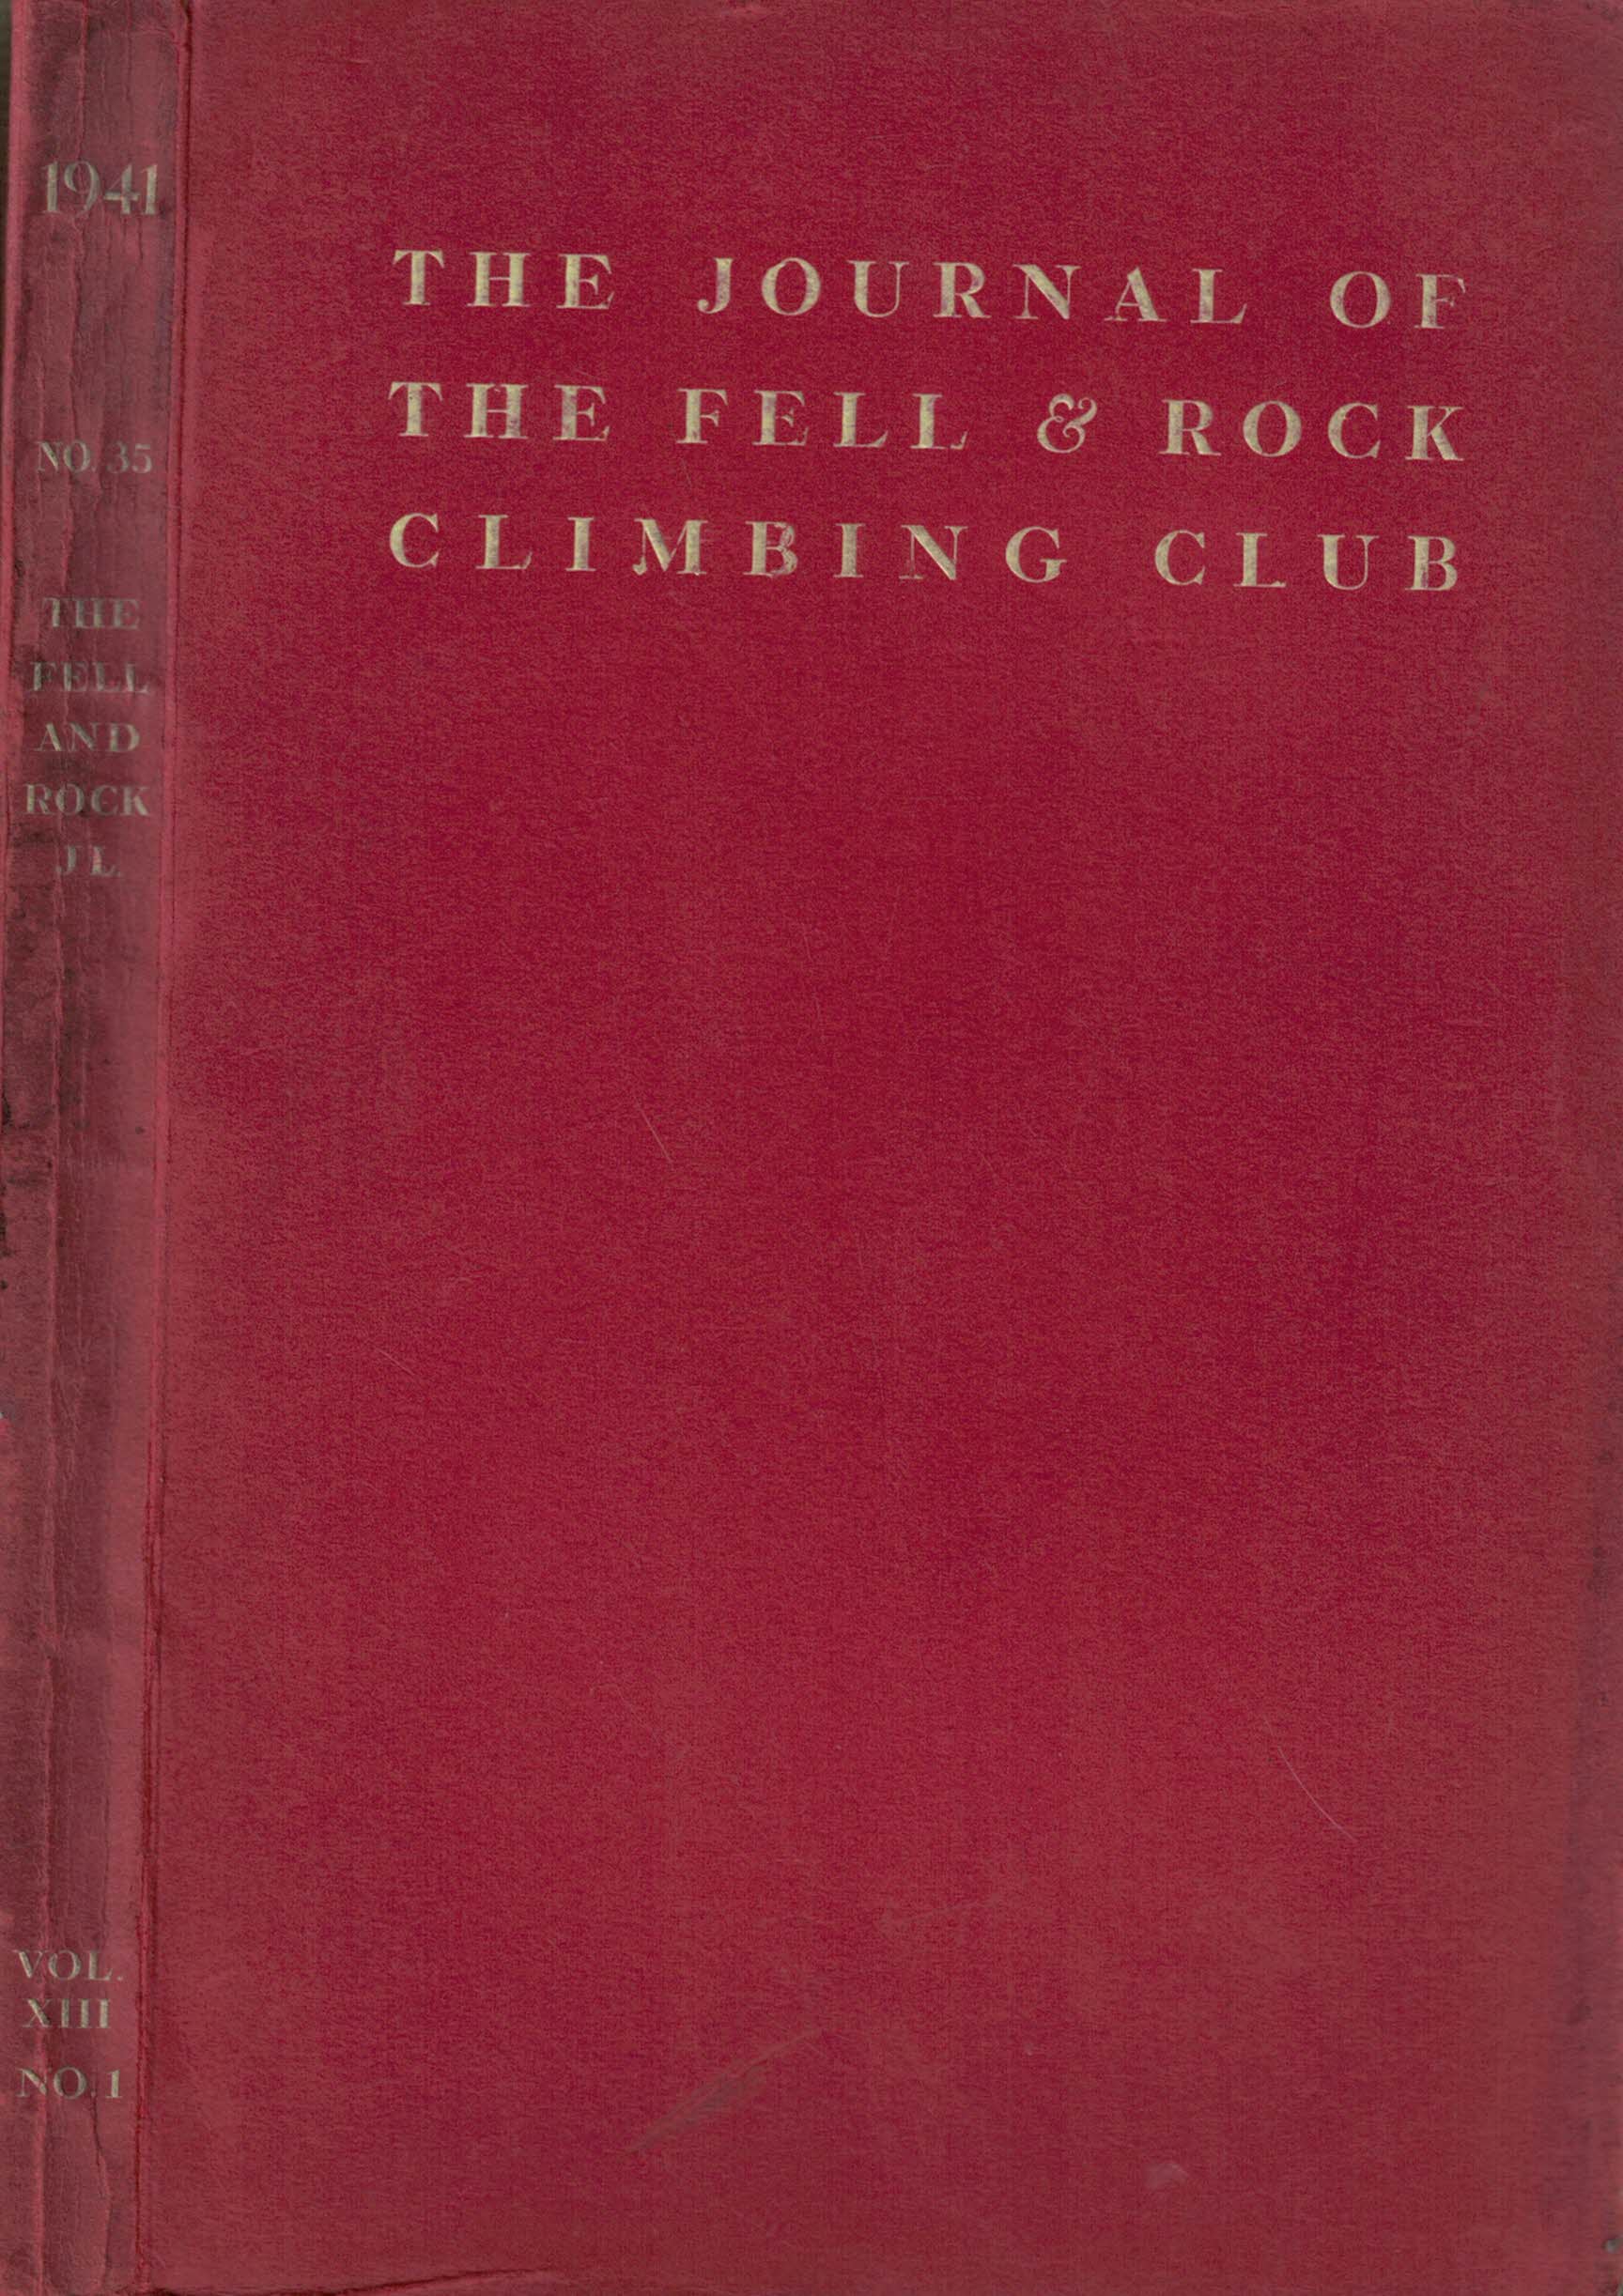 The Journal of the Fell & Rock Climbing Club of the English Lake District. No 35. (Volume 13 No 1) 1941.